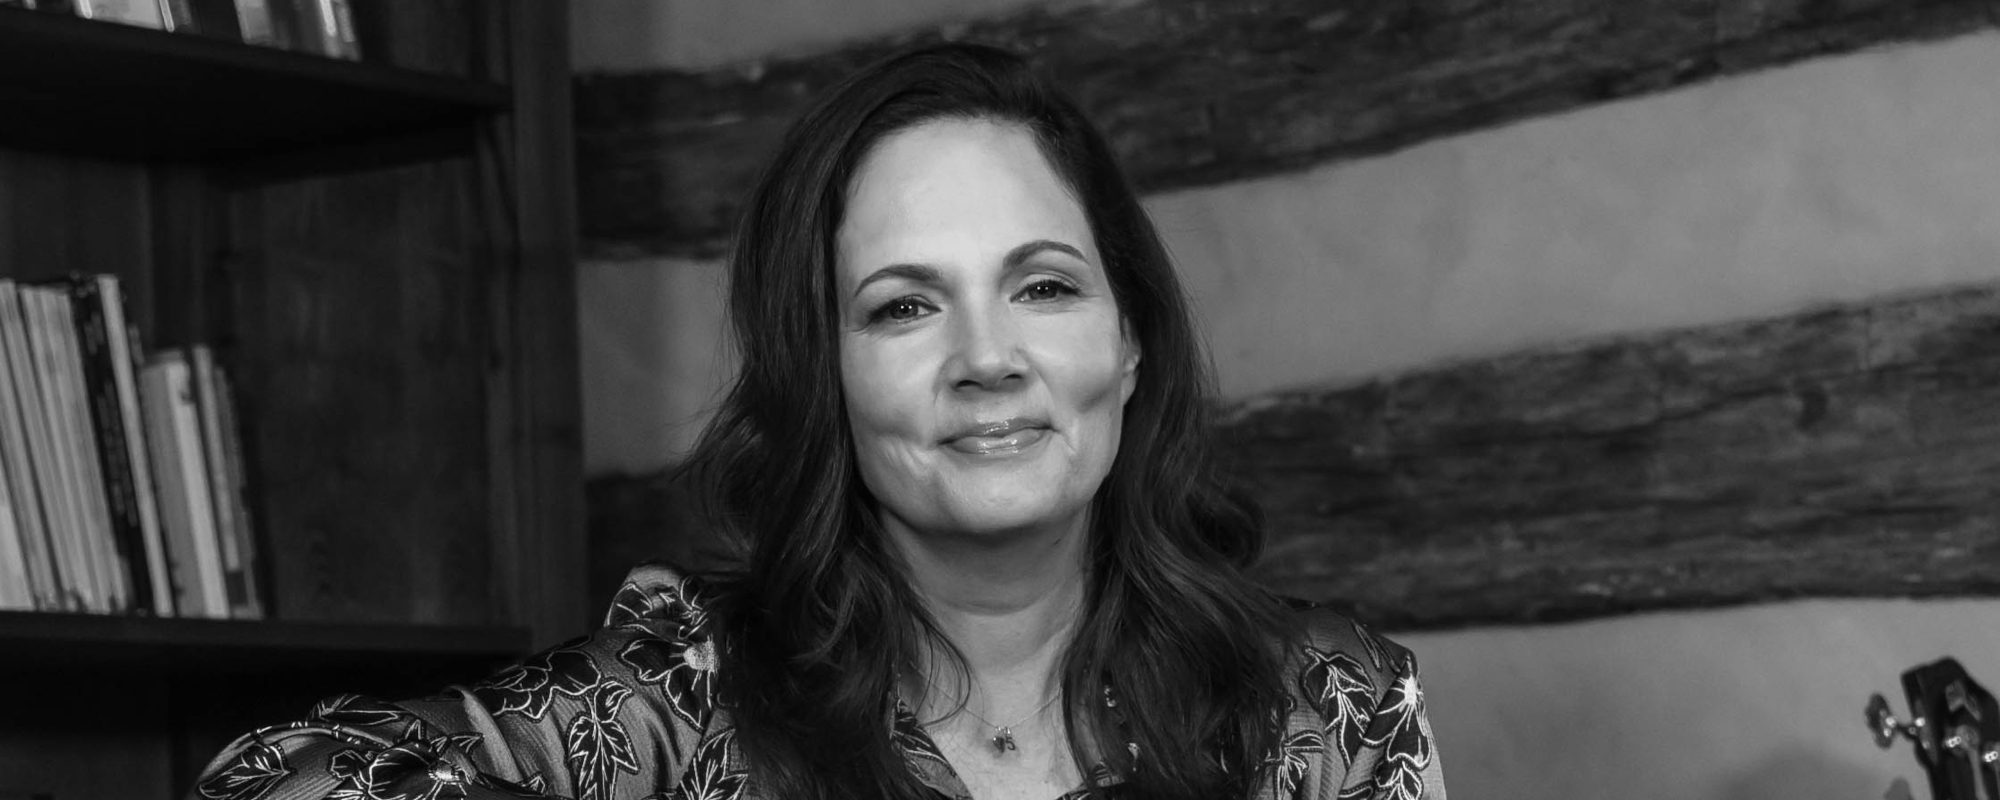 Lori McKenna Shares Poignant Video for ‘The Town in Your Heart’